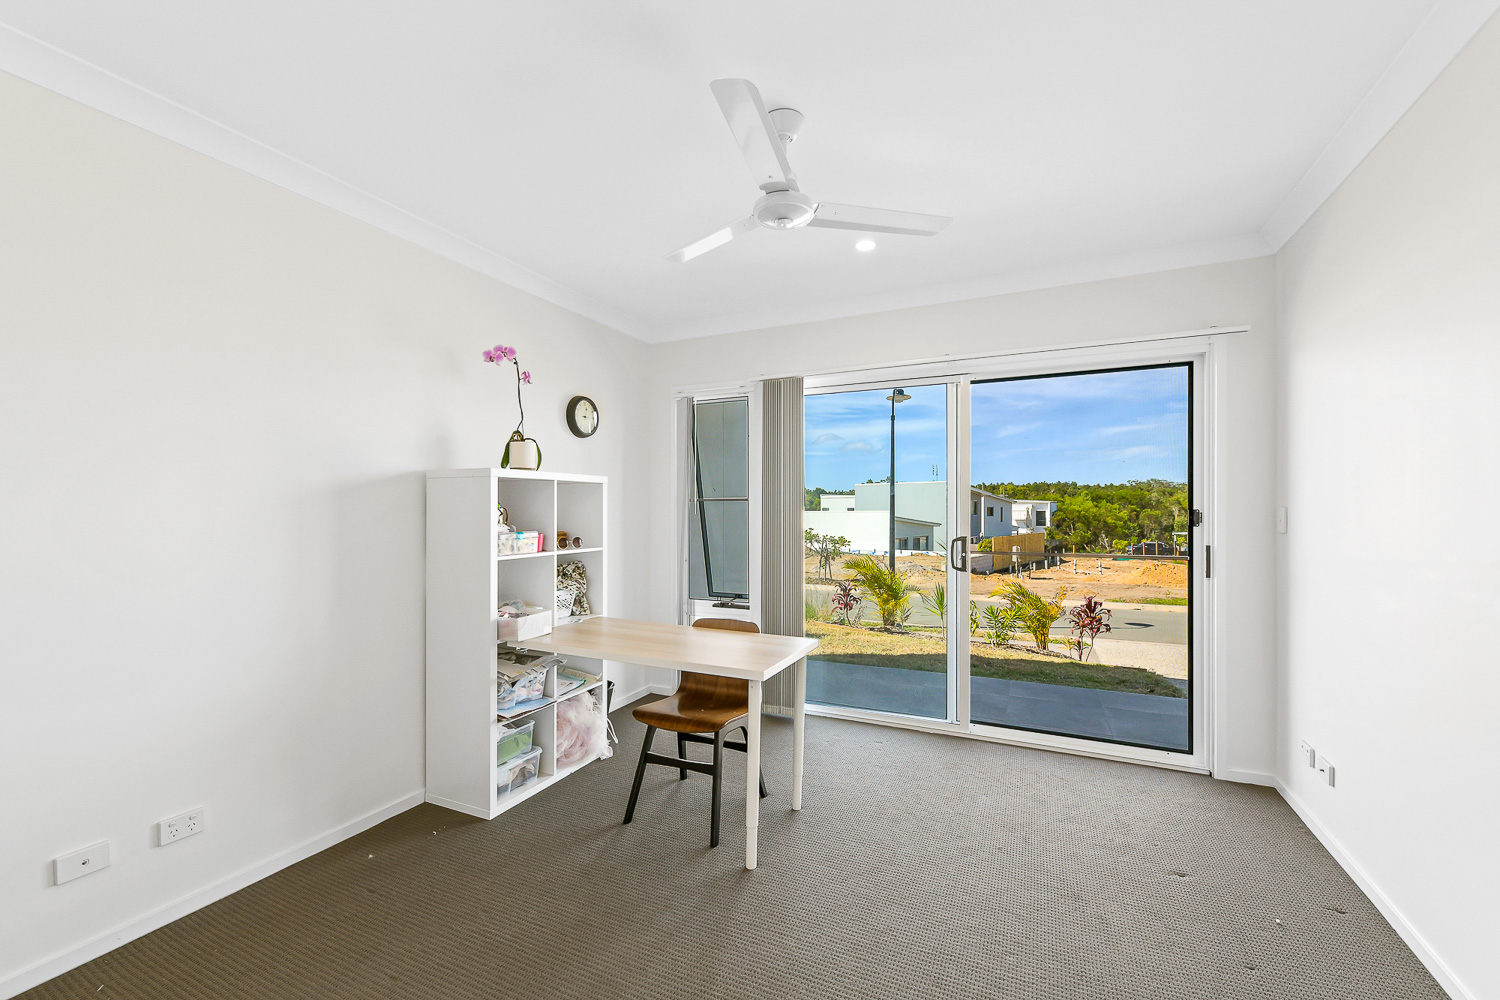 Sunshine property photos, replace existing furniture with virtual staging. Quality results will be sure to bring the buyers in. Sell your home faster and get the attention you need. Market your property today with fast turnaround on all images.